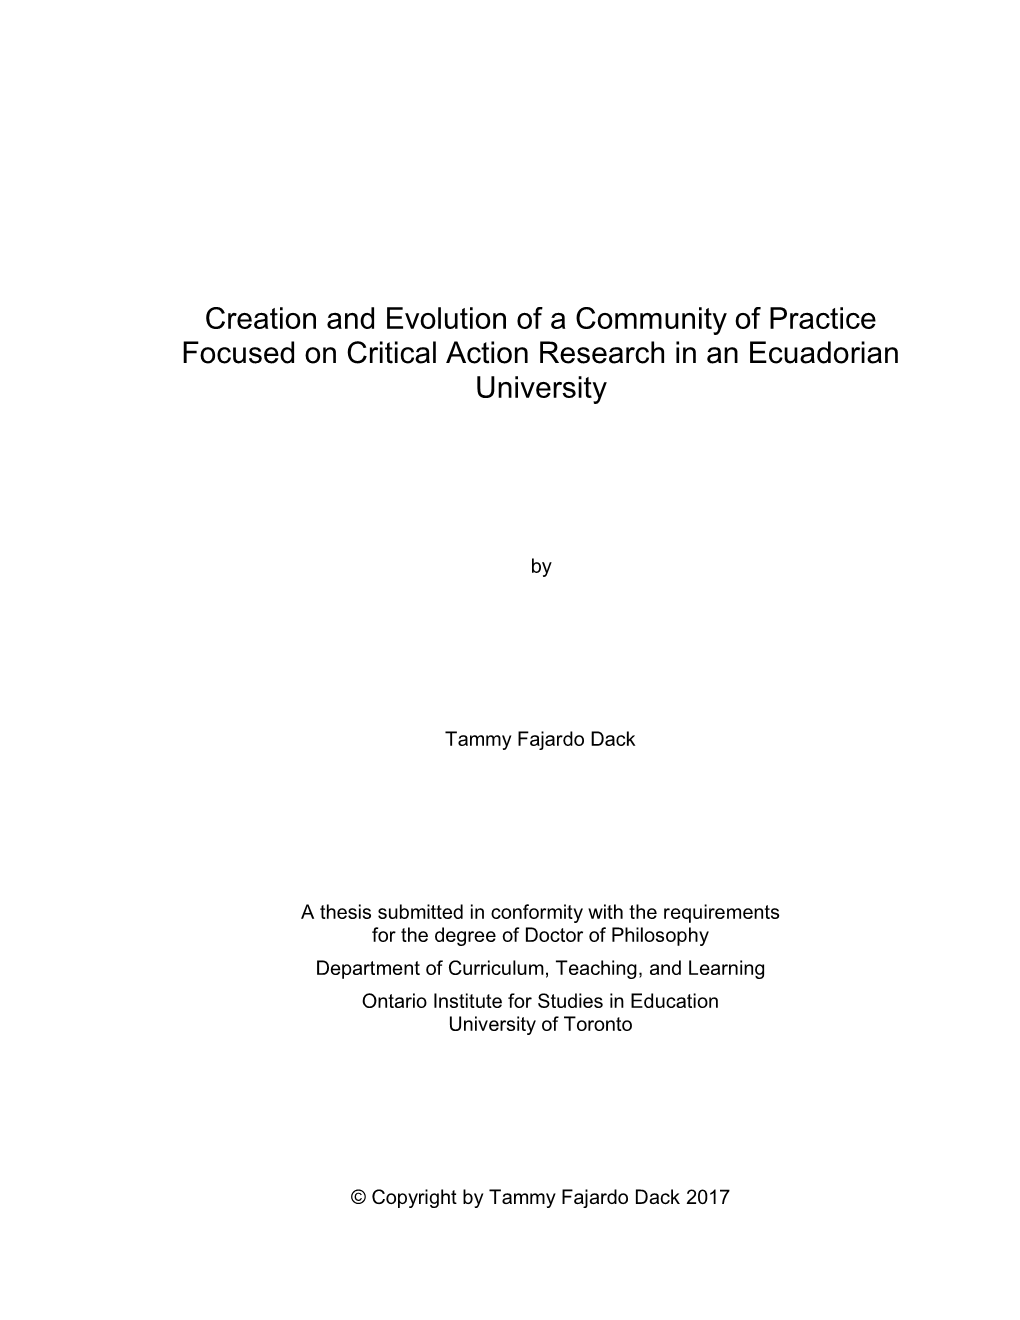 Creation and Evolution of a Community of Practice Focused on Critical Action Research in an Ecuadorian University